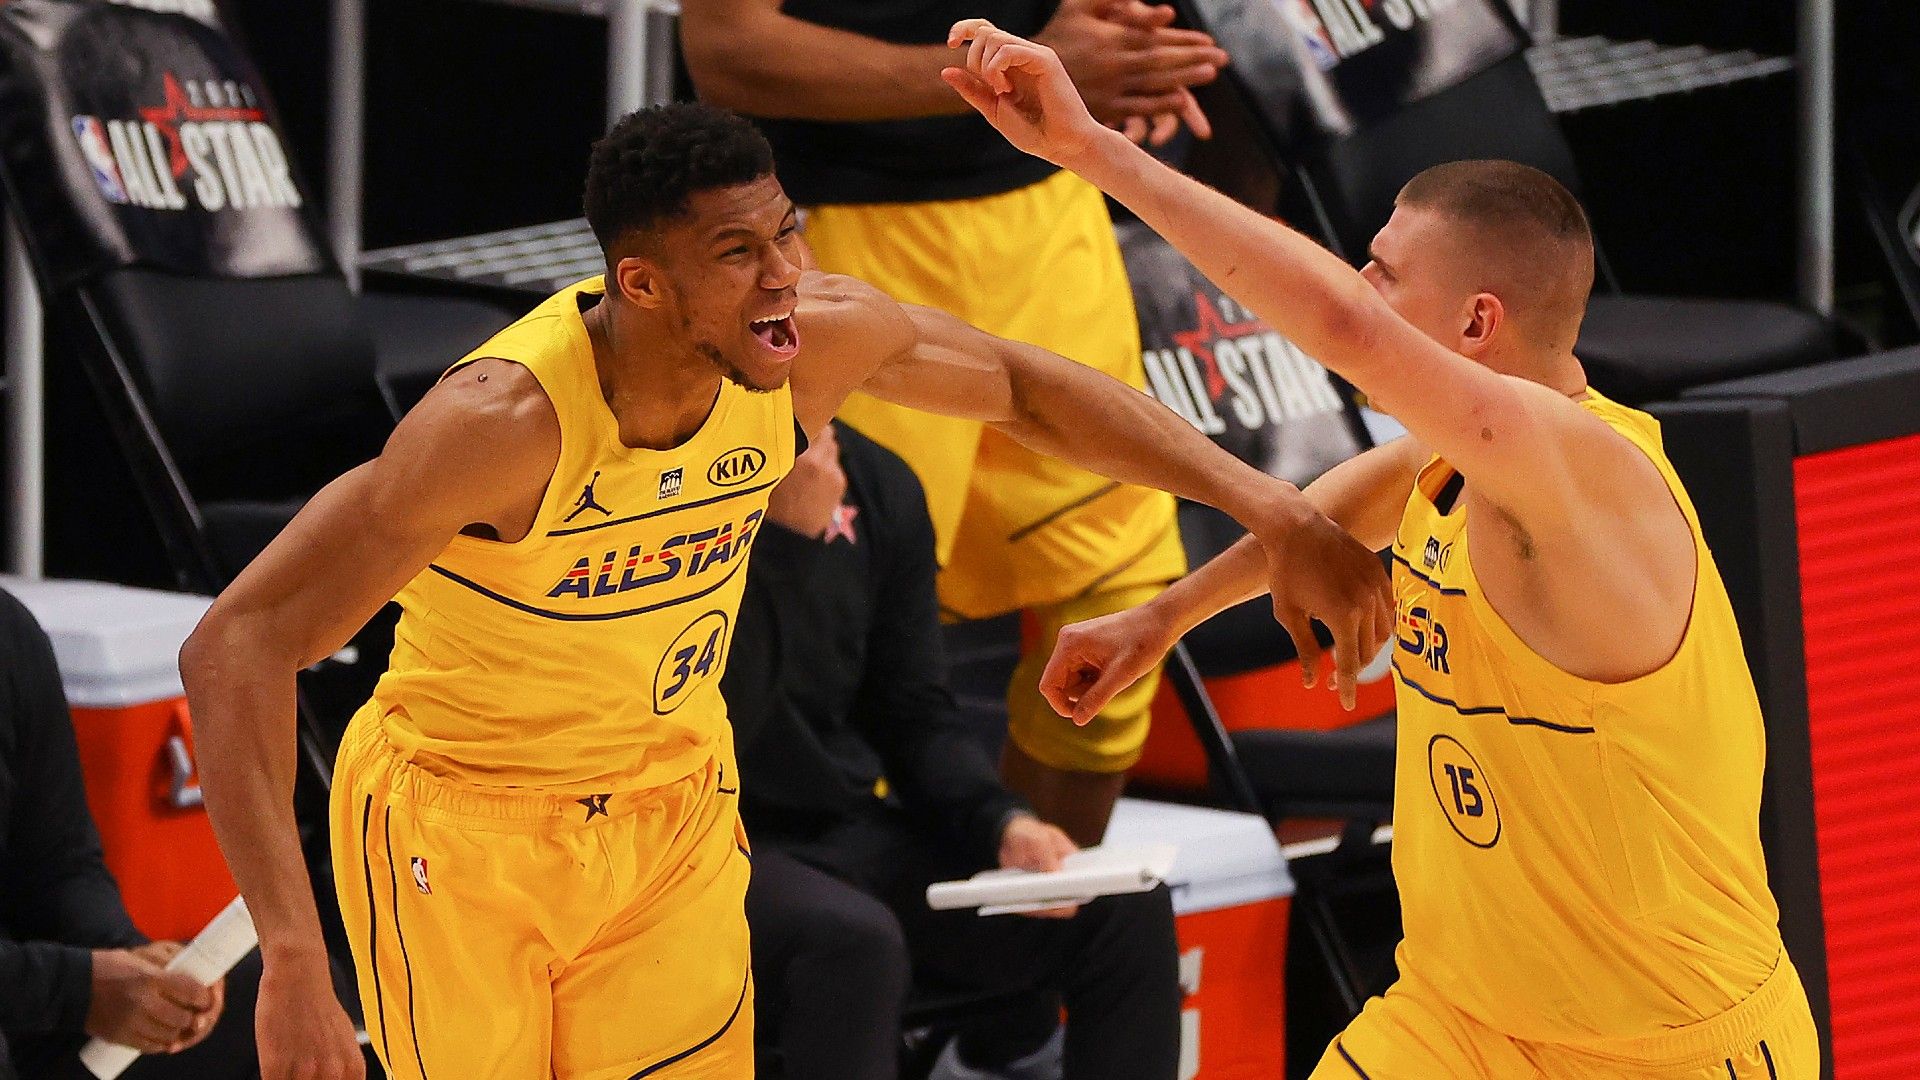 NBA All Star Game 2021 Results, Highlights: Giannis Antetokounmpo Wins MVP As Team LeBron Cruises To Victory